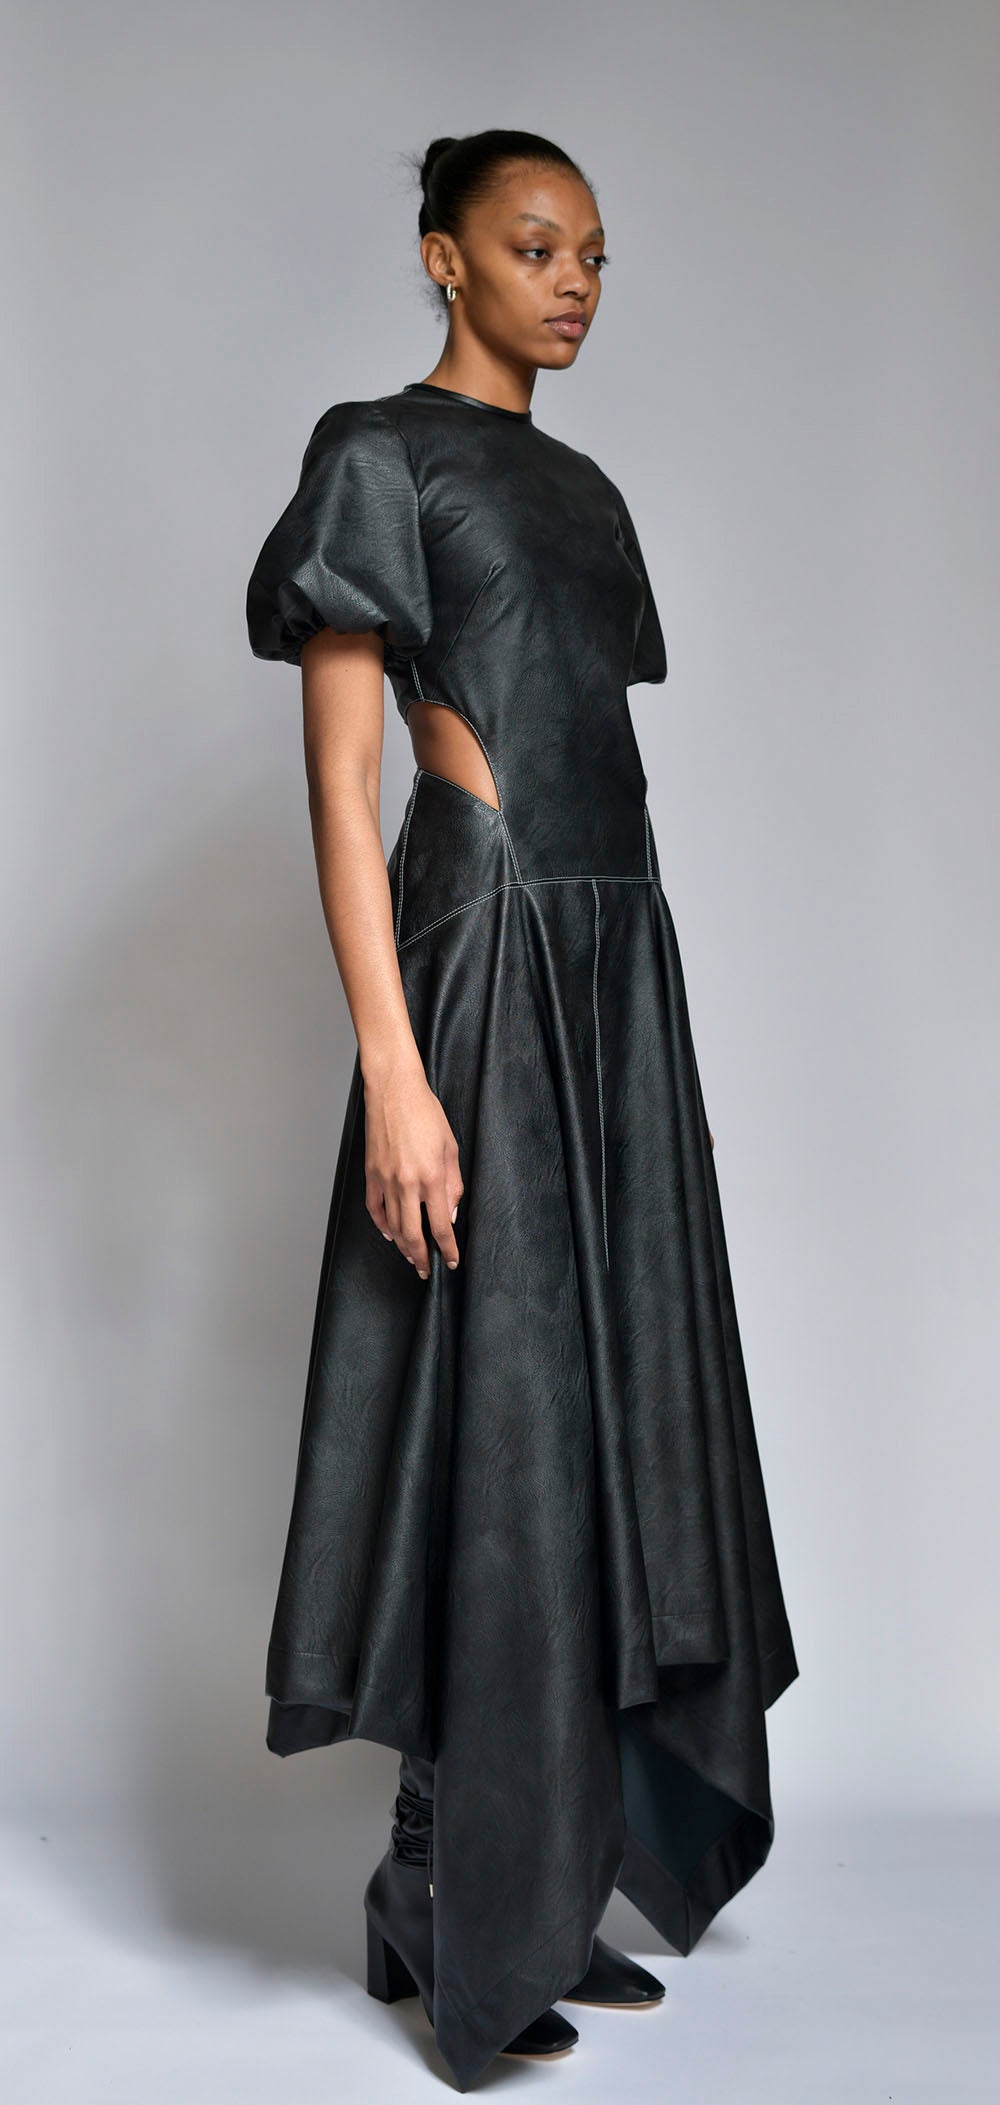 Onyx Vegan Leather with Cut-out Detail and Handkerchief Hem